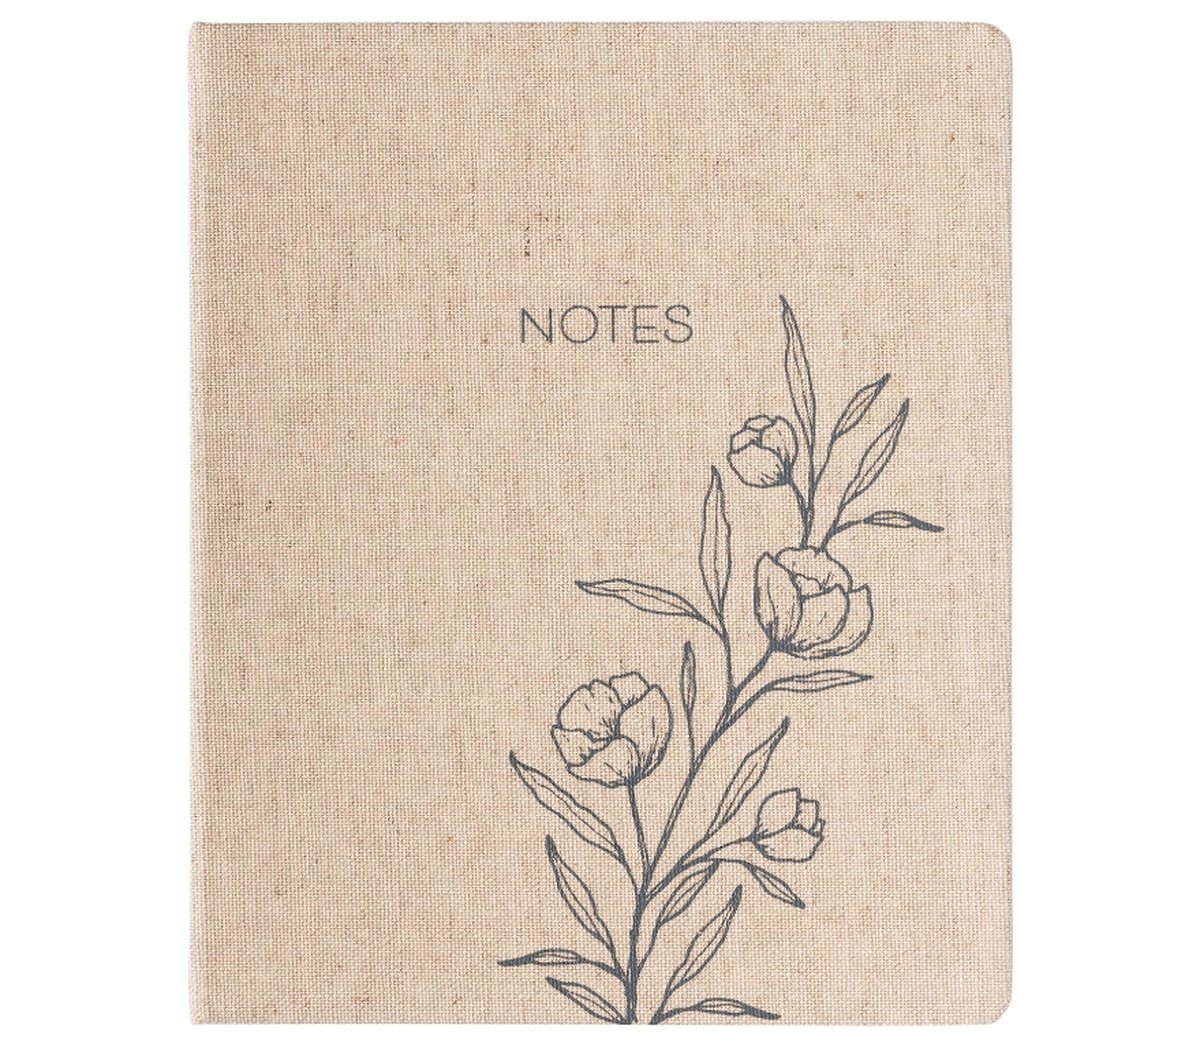 Eccolo Large Lined Journal Notebook, Hardbound Cover, Writing Journal, 256 Ruled Cream Pages, Ribbon Bookmark, Lay Flat, Desk Size for Work or School (Debossed Floral, 25.4 x 20.32 x 1.91 cm) Hardcover